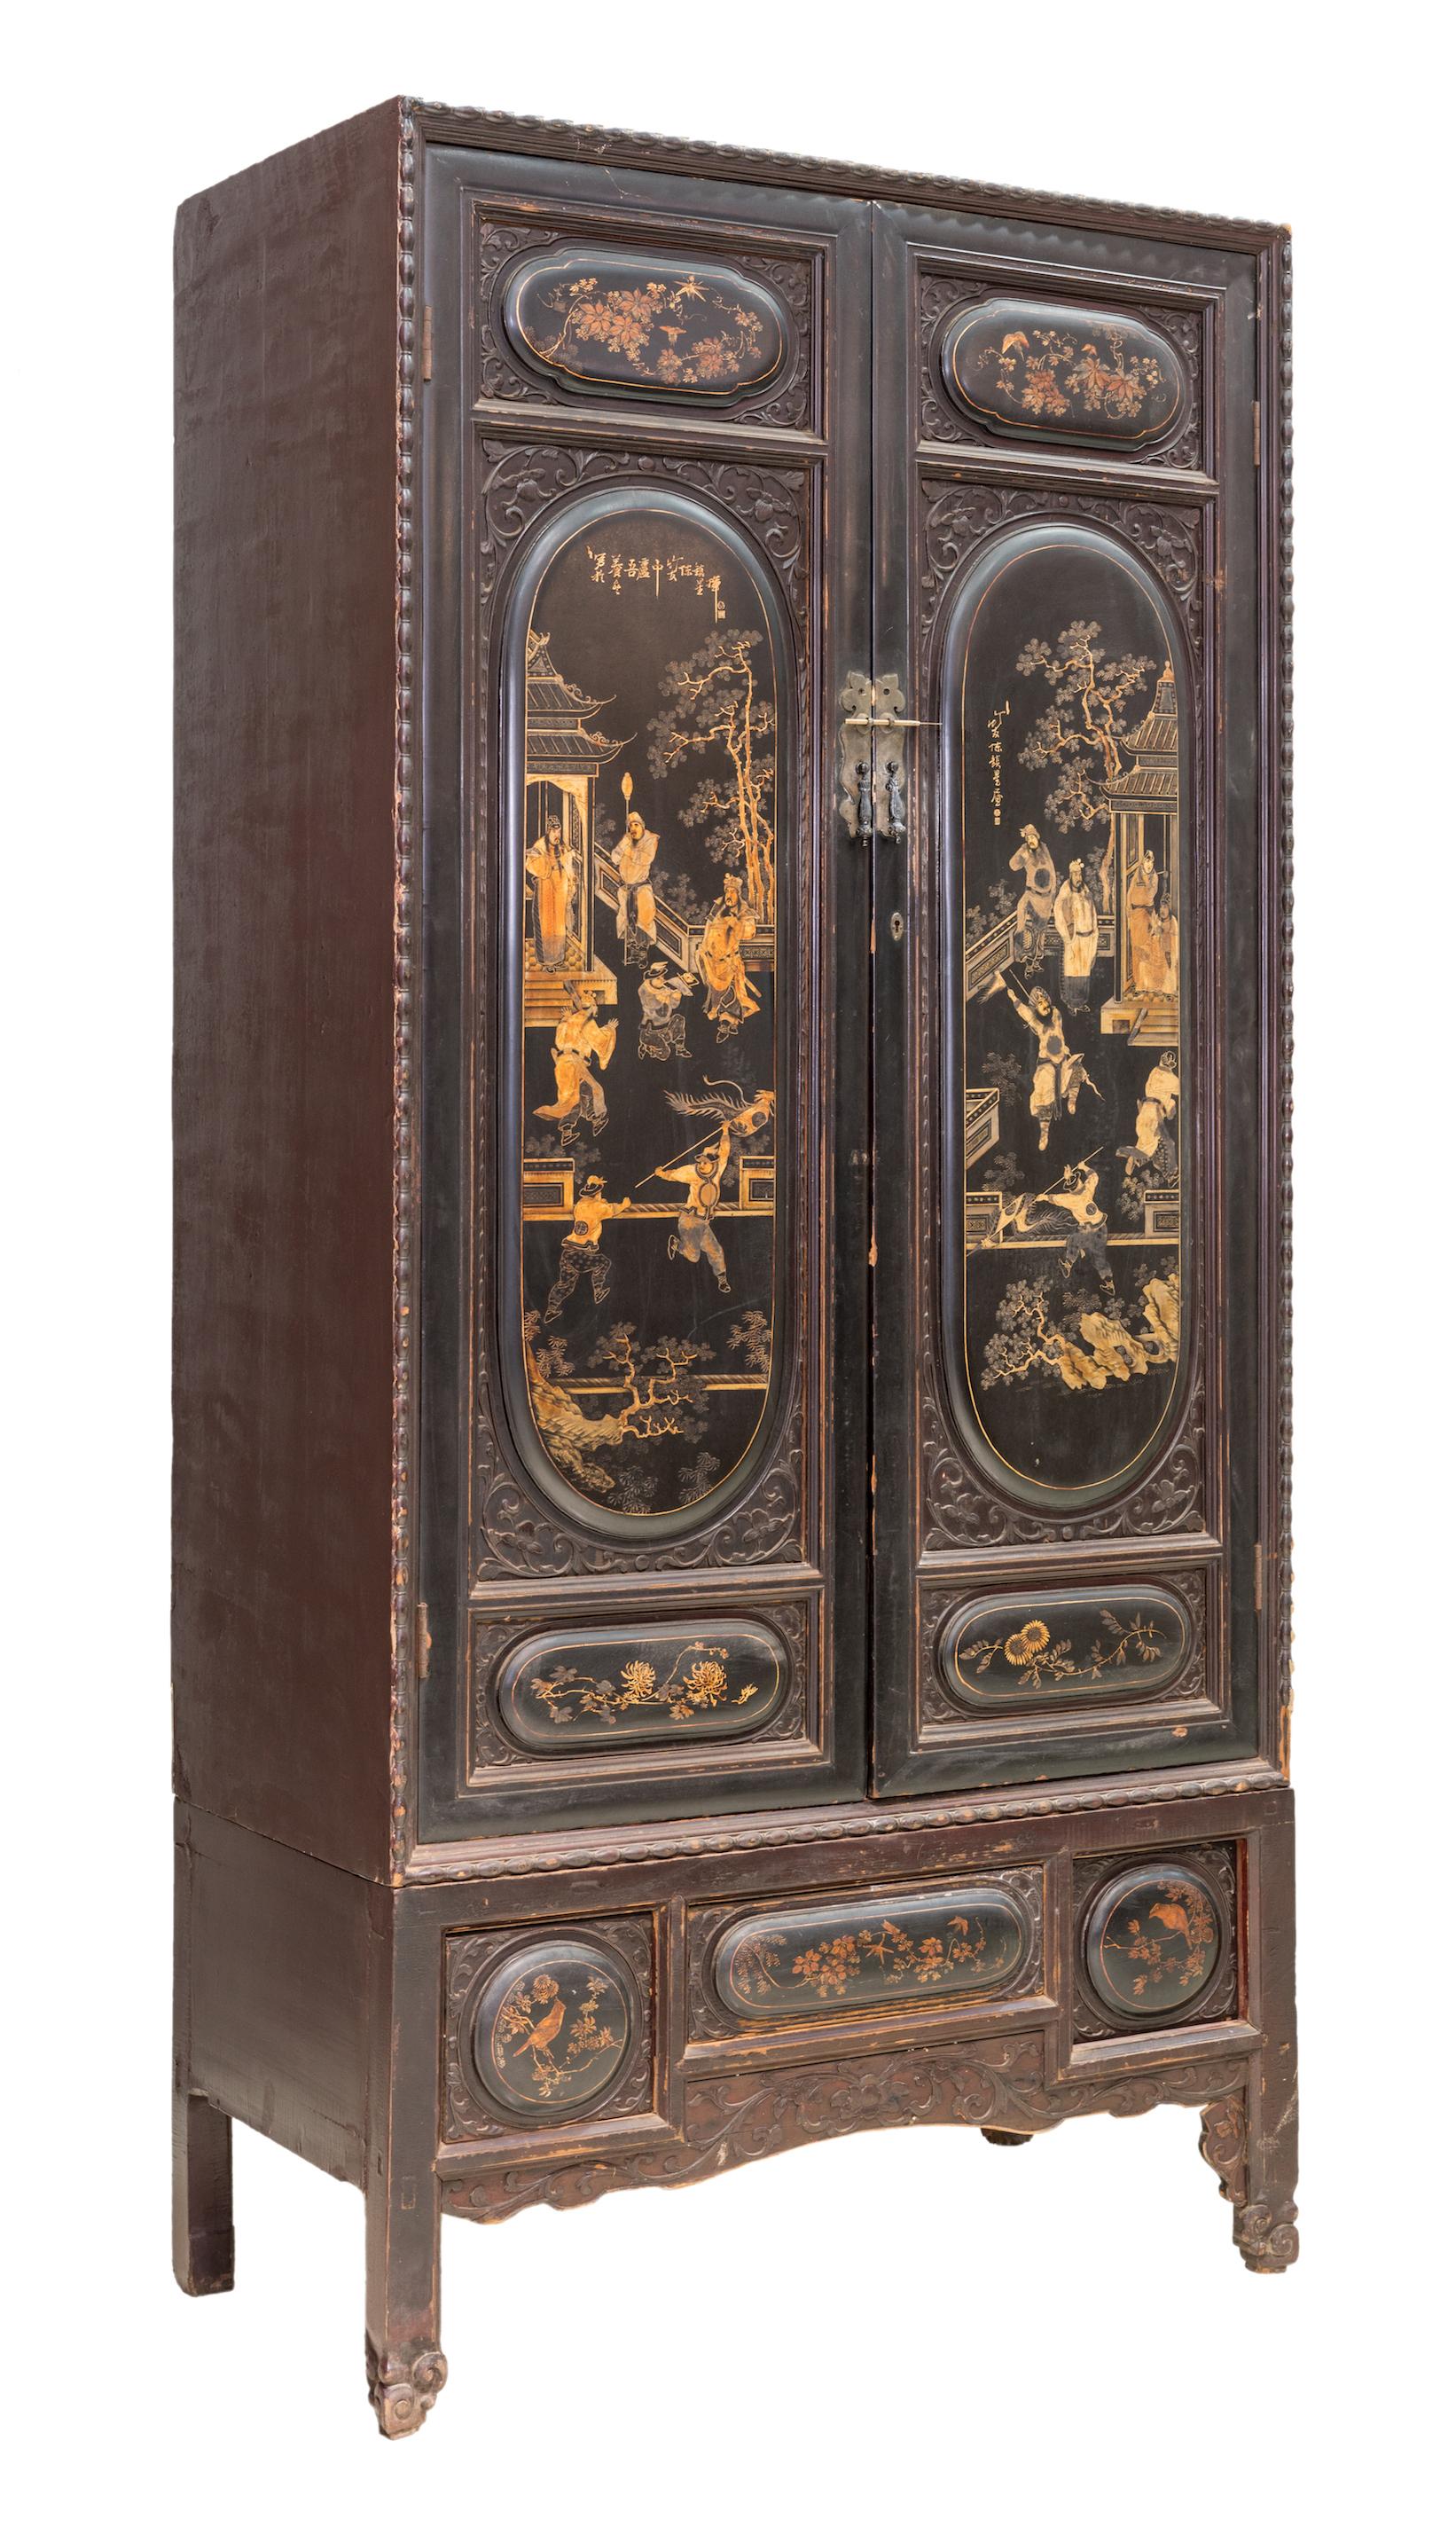 A tall and handsome 2-tier black lacquered cabinet with gold painting from Chaozhou city, Guangdong province, China. The two oval-shaped raised panels on the doors have very fine painting and depicts a lively opera troupe acting in the courtyard.